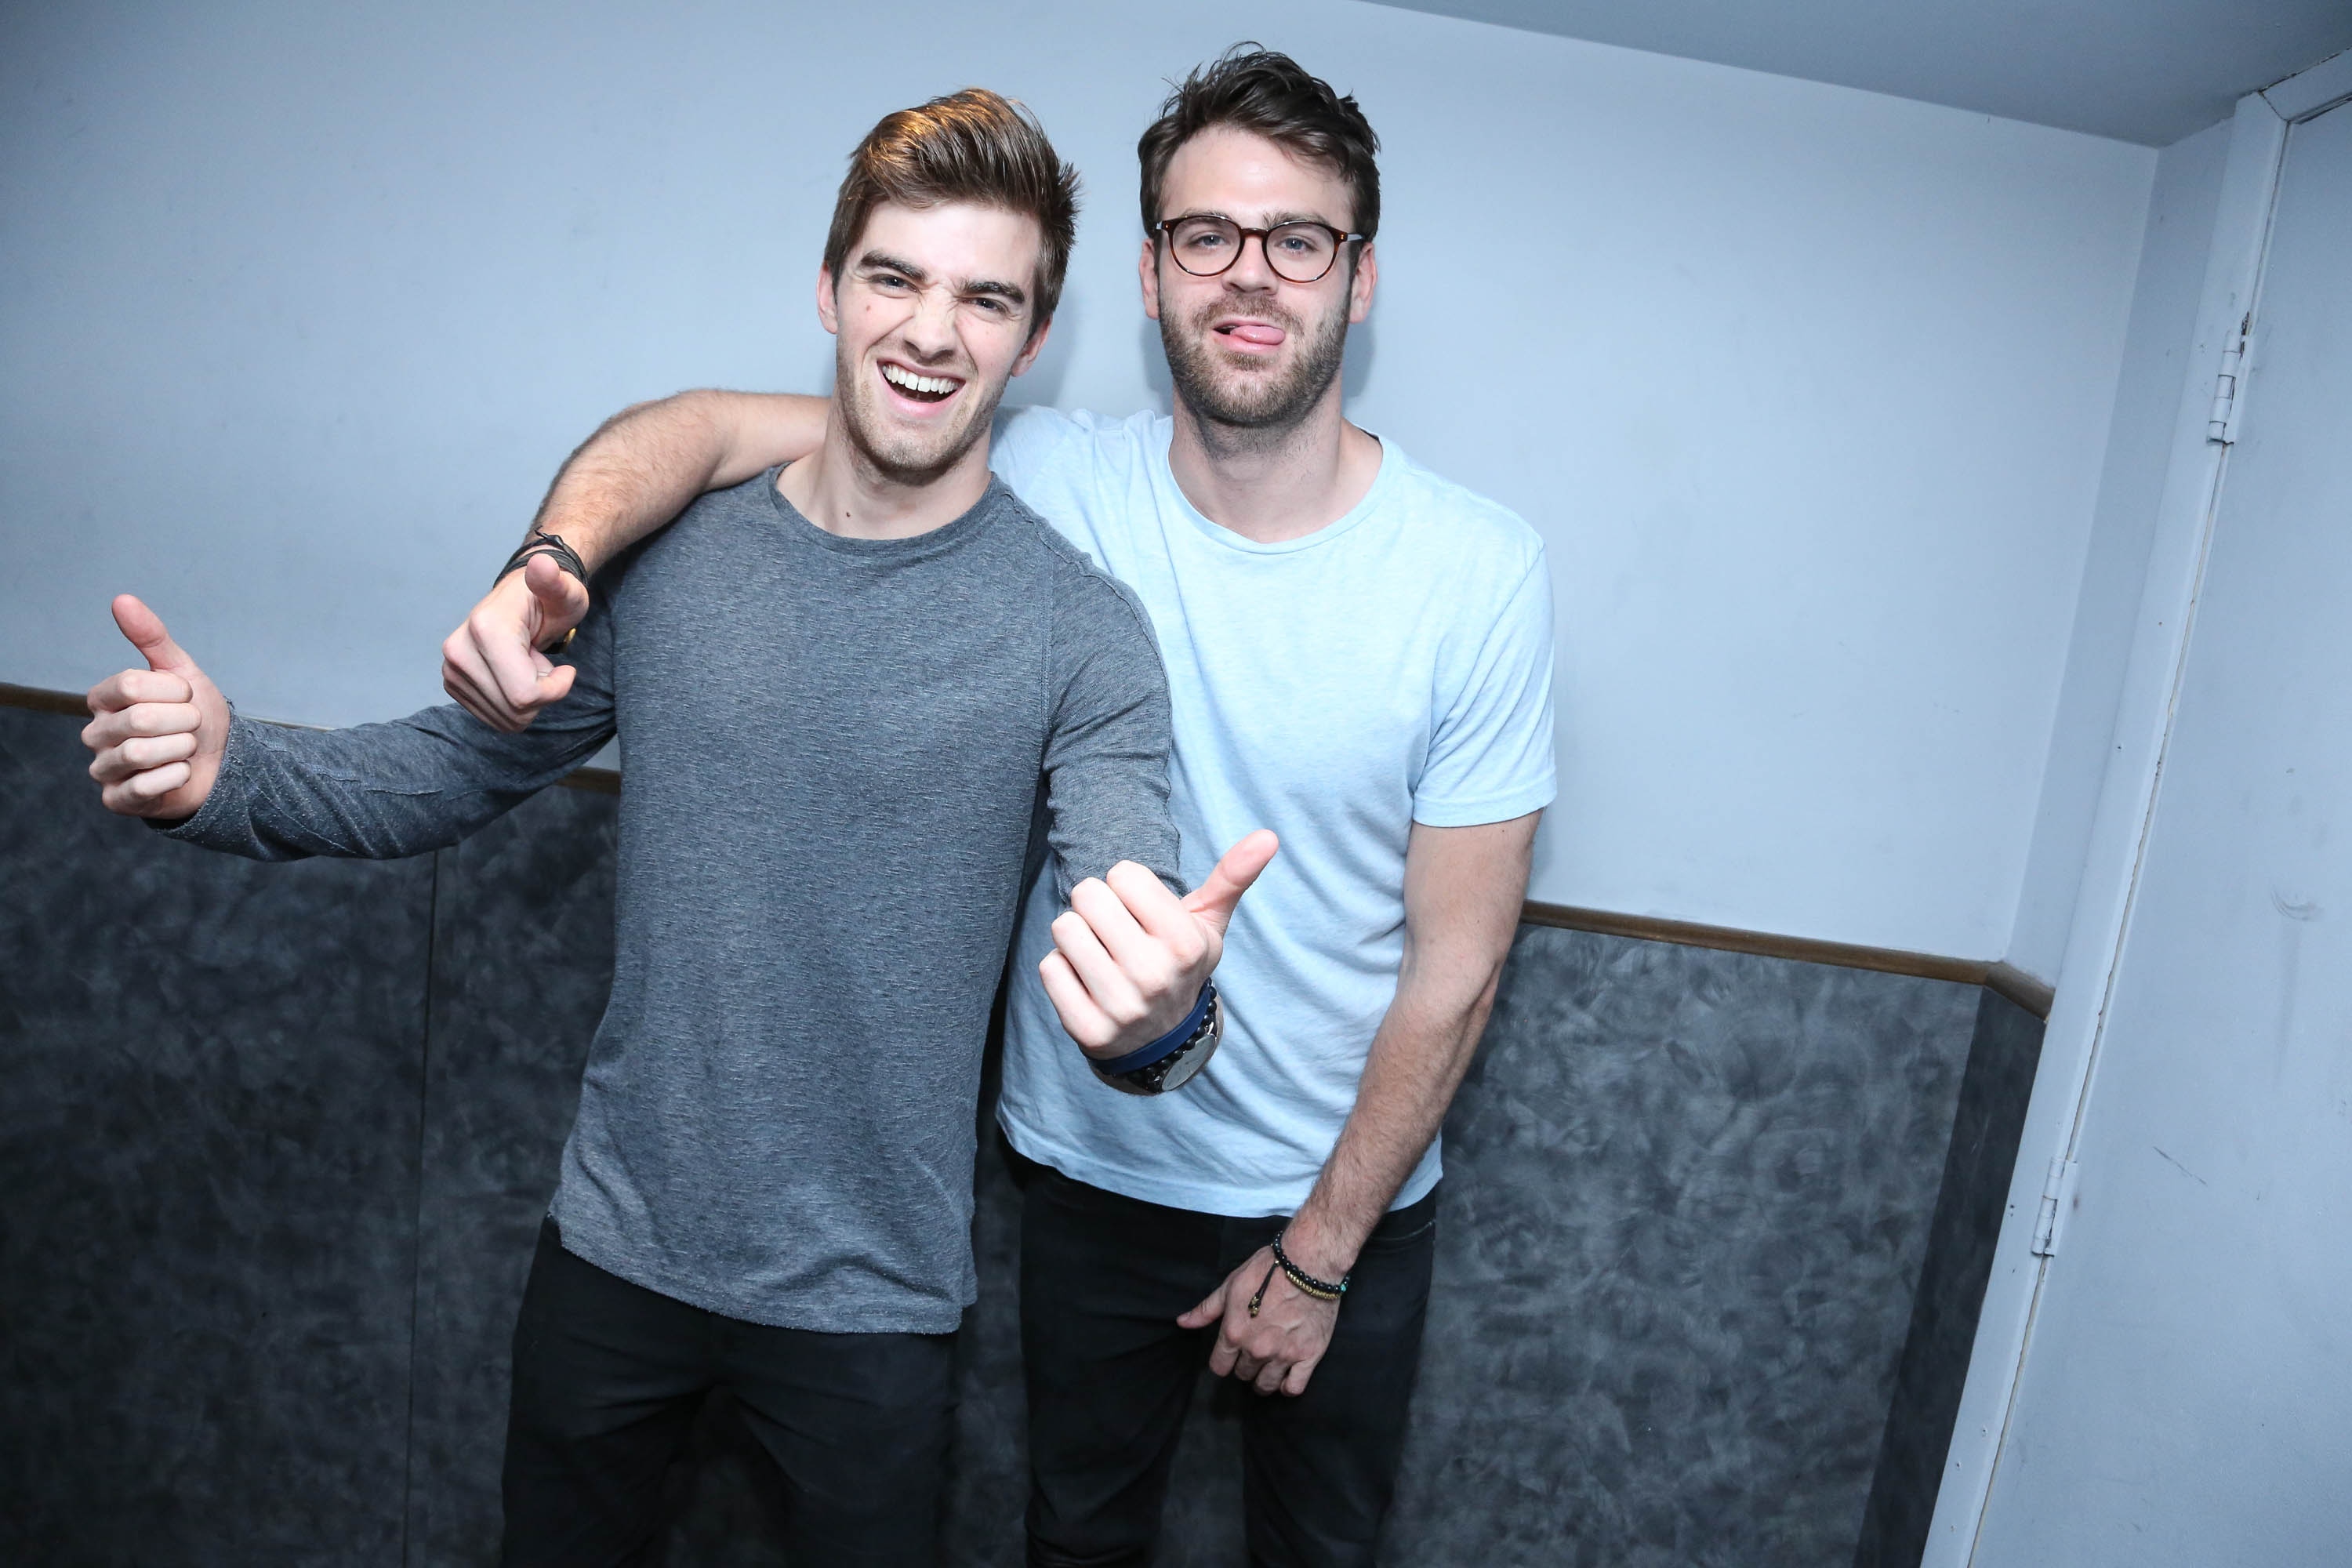 10+ The Chainsmokers HD Wallpapers and